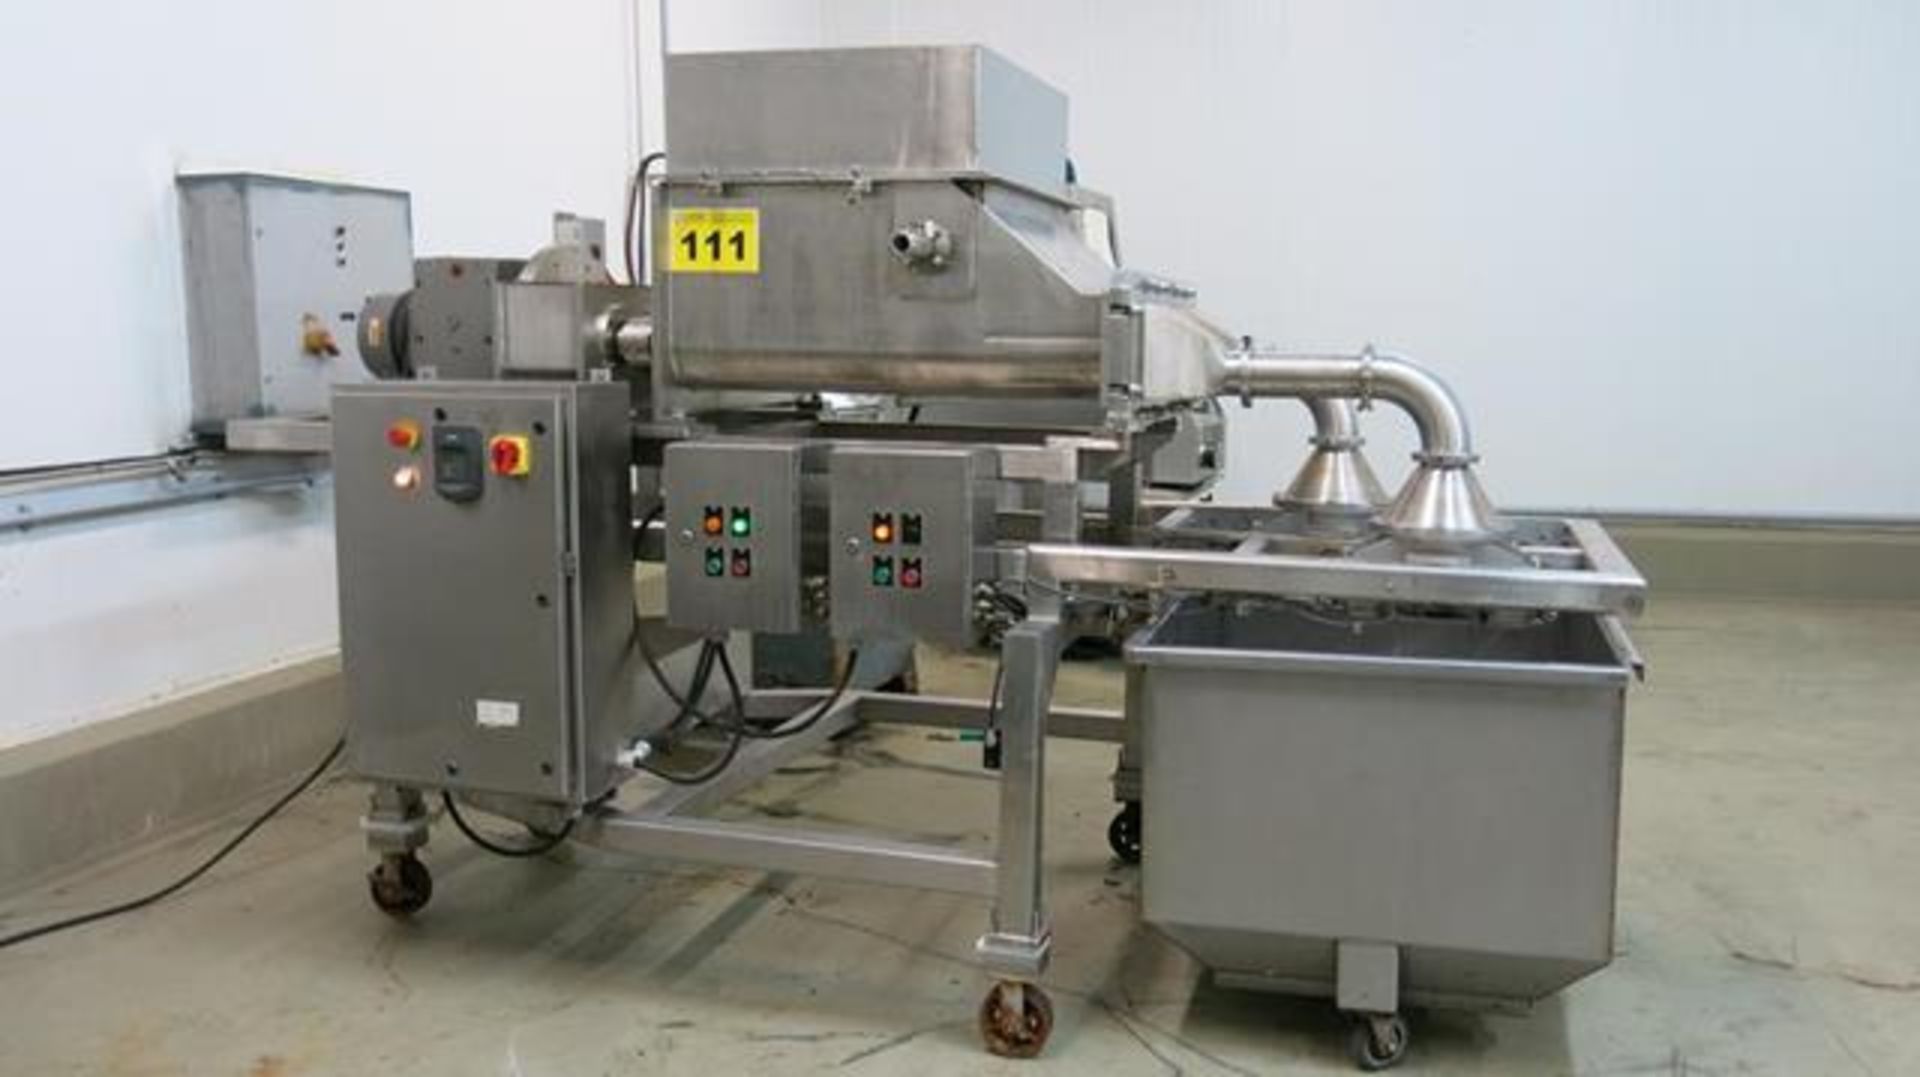 POLAR PROCESS, SUNNY CRUNCH, STAINLESS STEEL, 7.5 HP, FOUR SCREW, TWO HEAD, EXTRUDER, 32" X 29" X